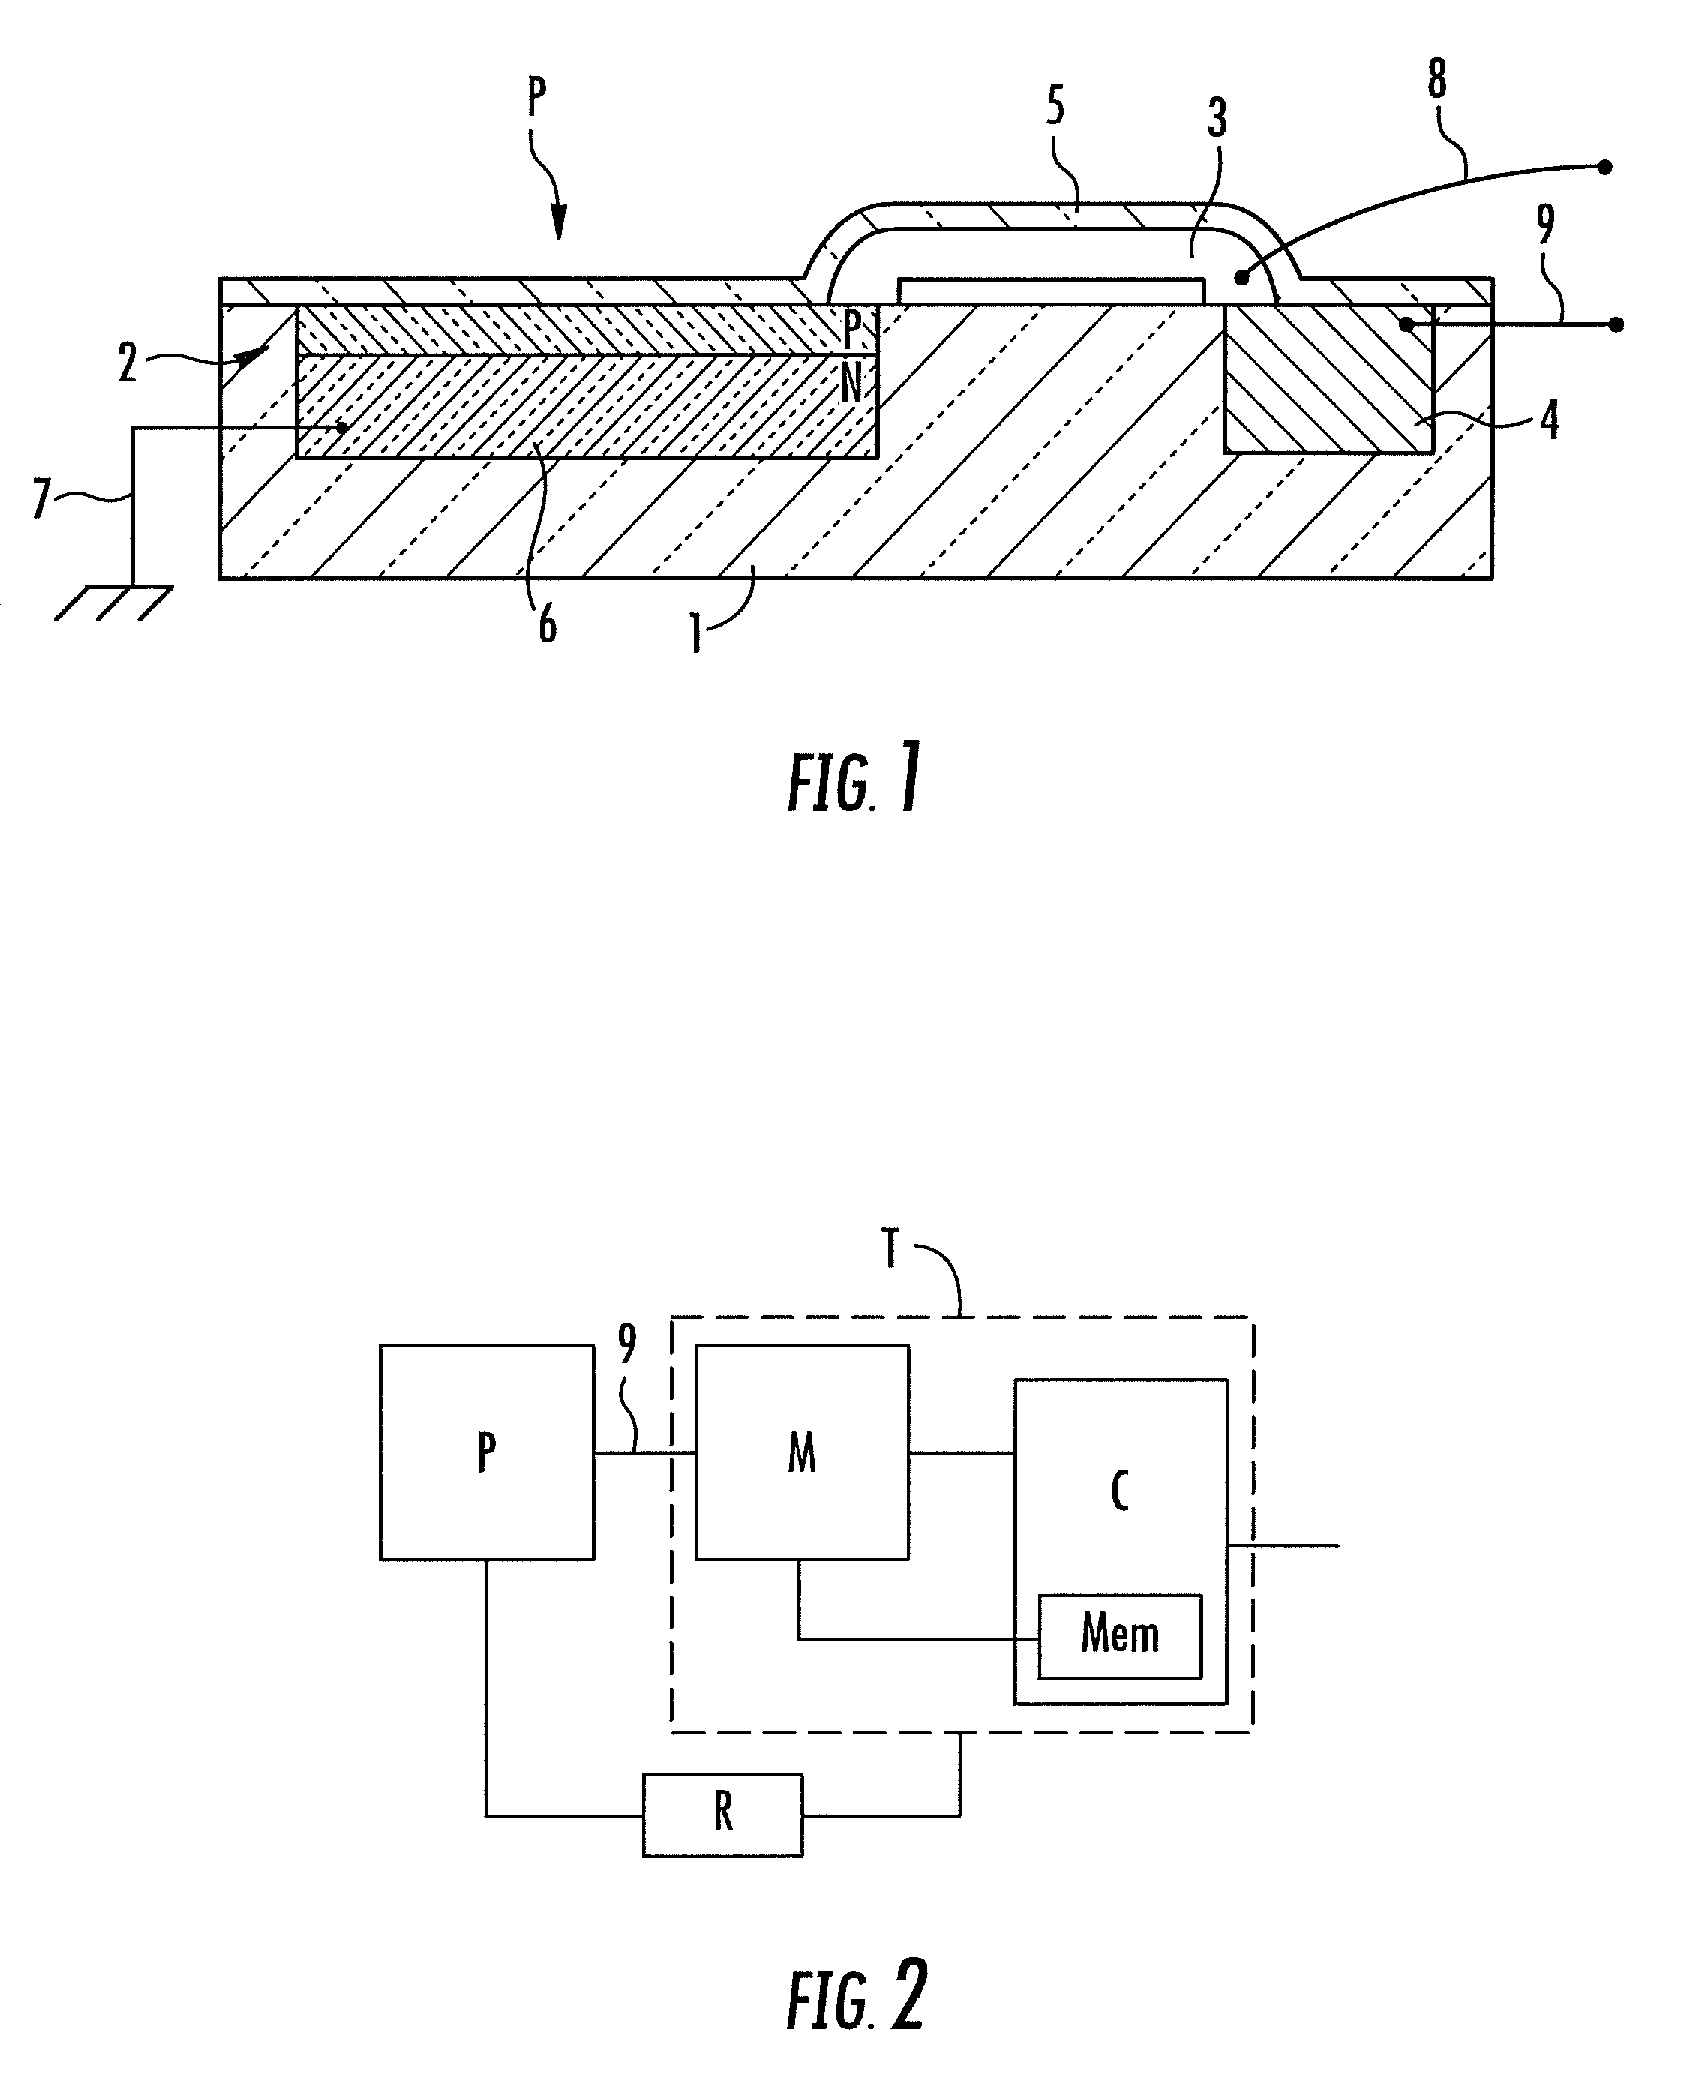 Device and method for measuring light energy received by at least one photosite